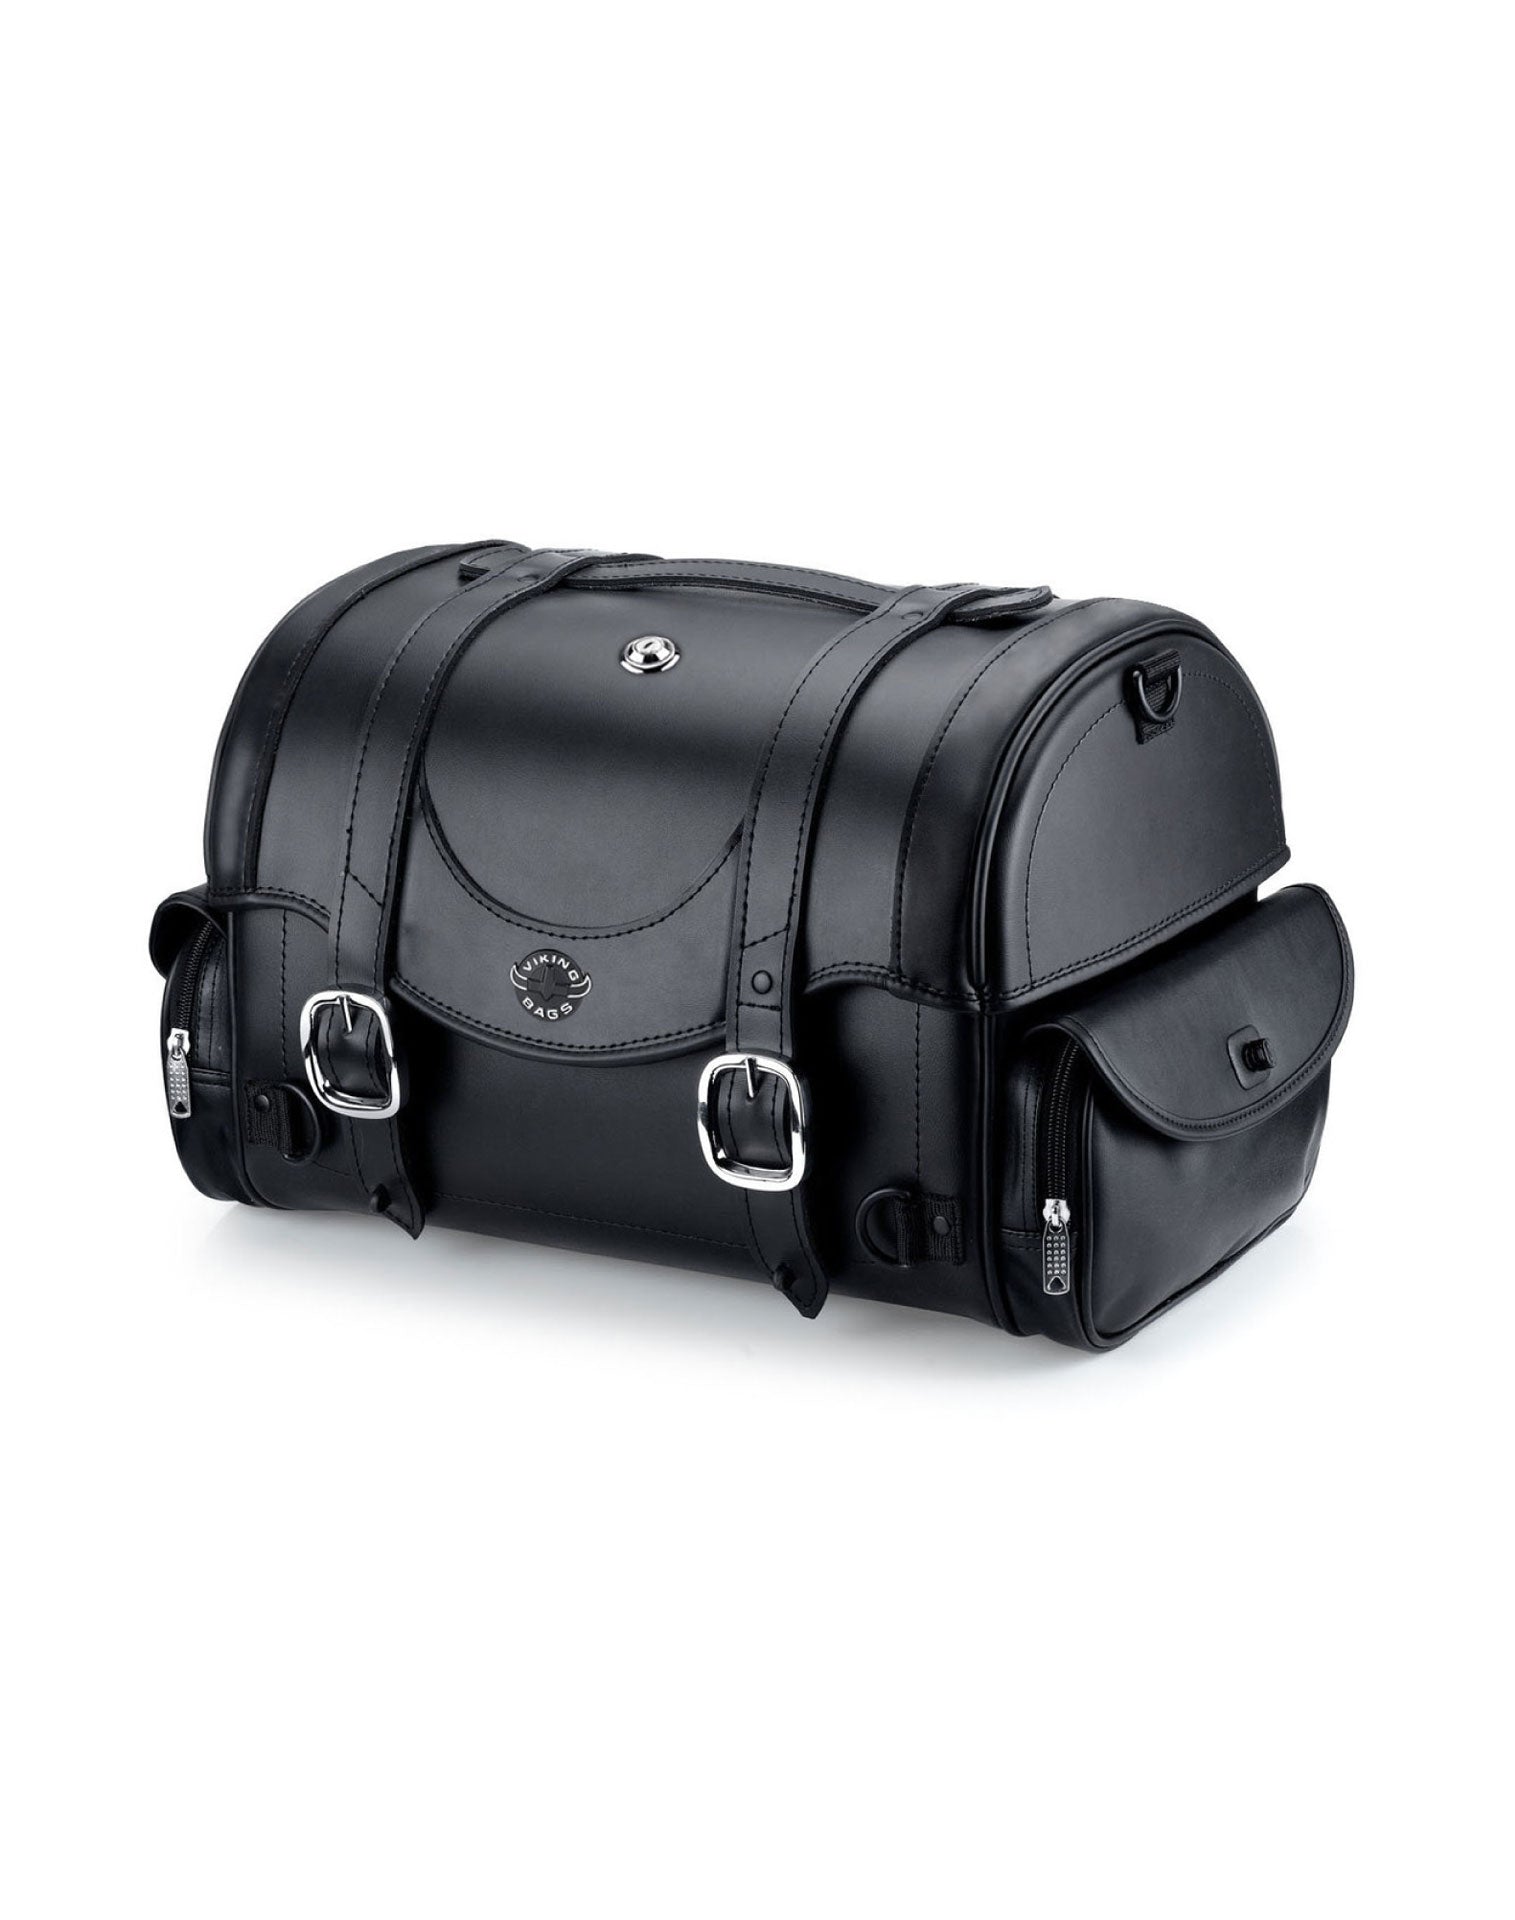 21L - Century Medium Leather Motorcycle Tail Bag for Harley Davidson